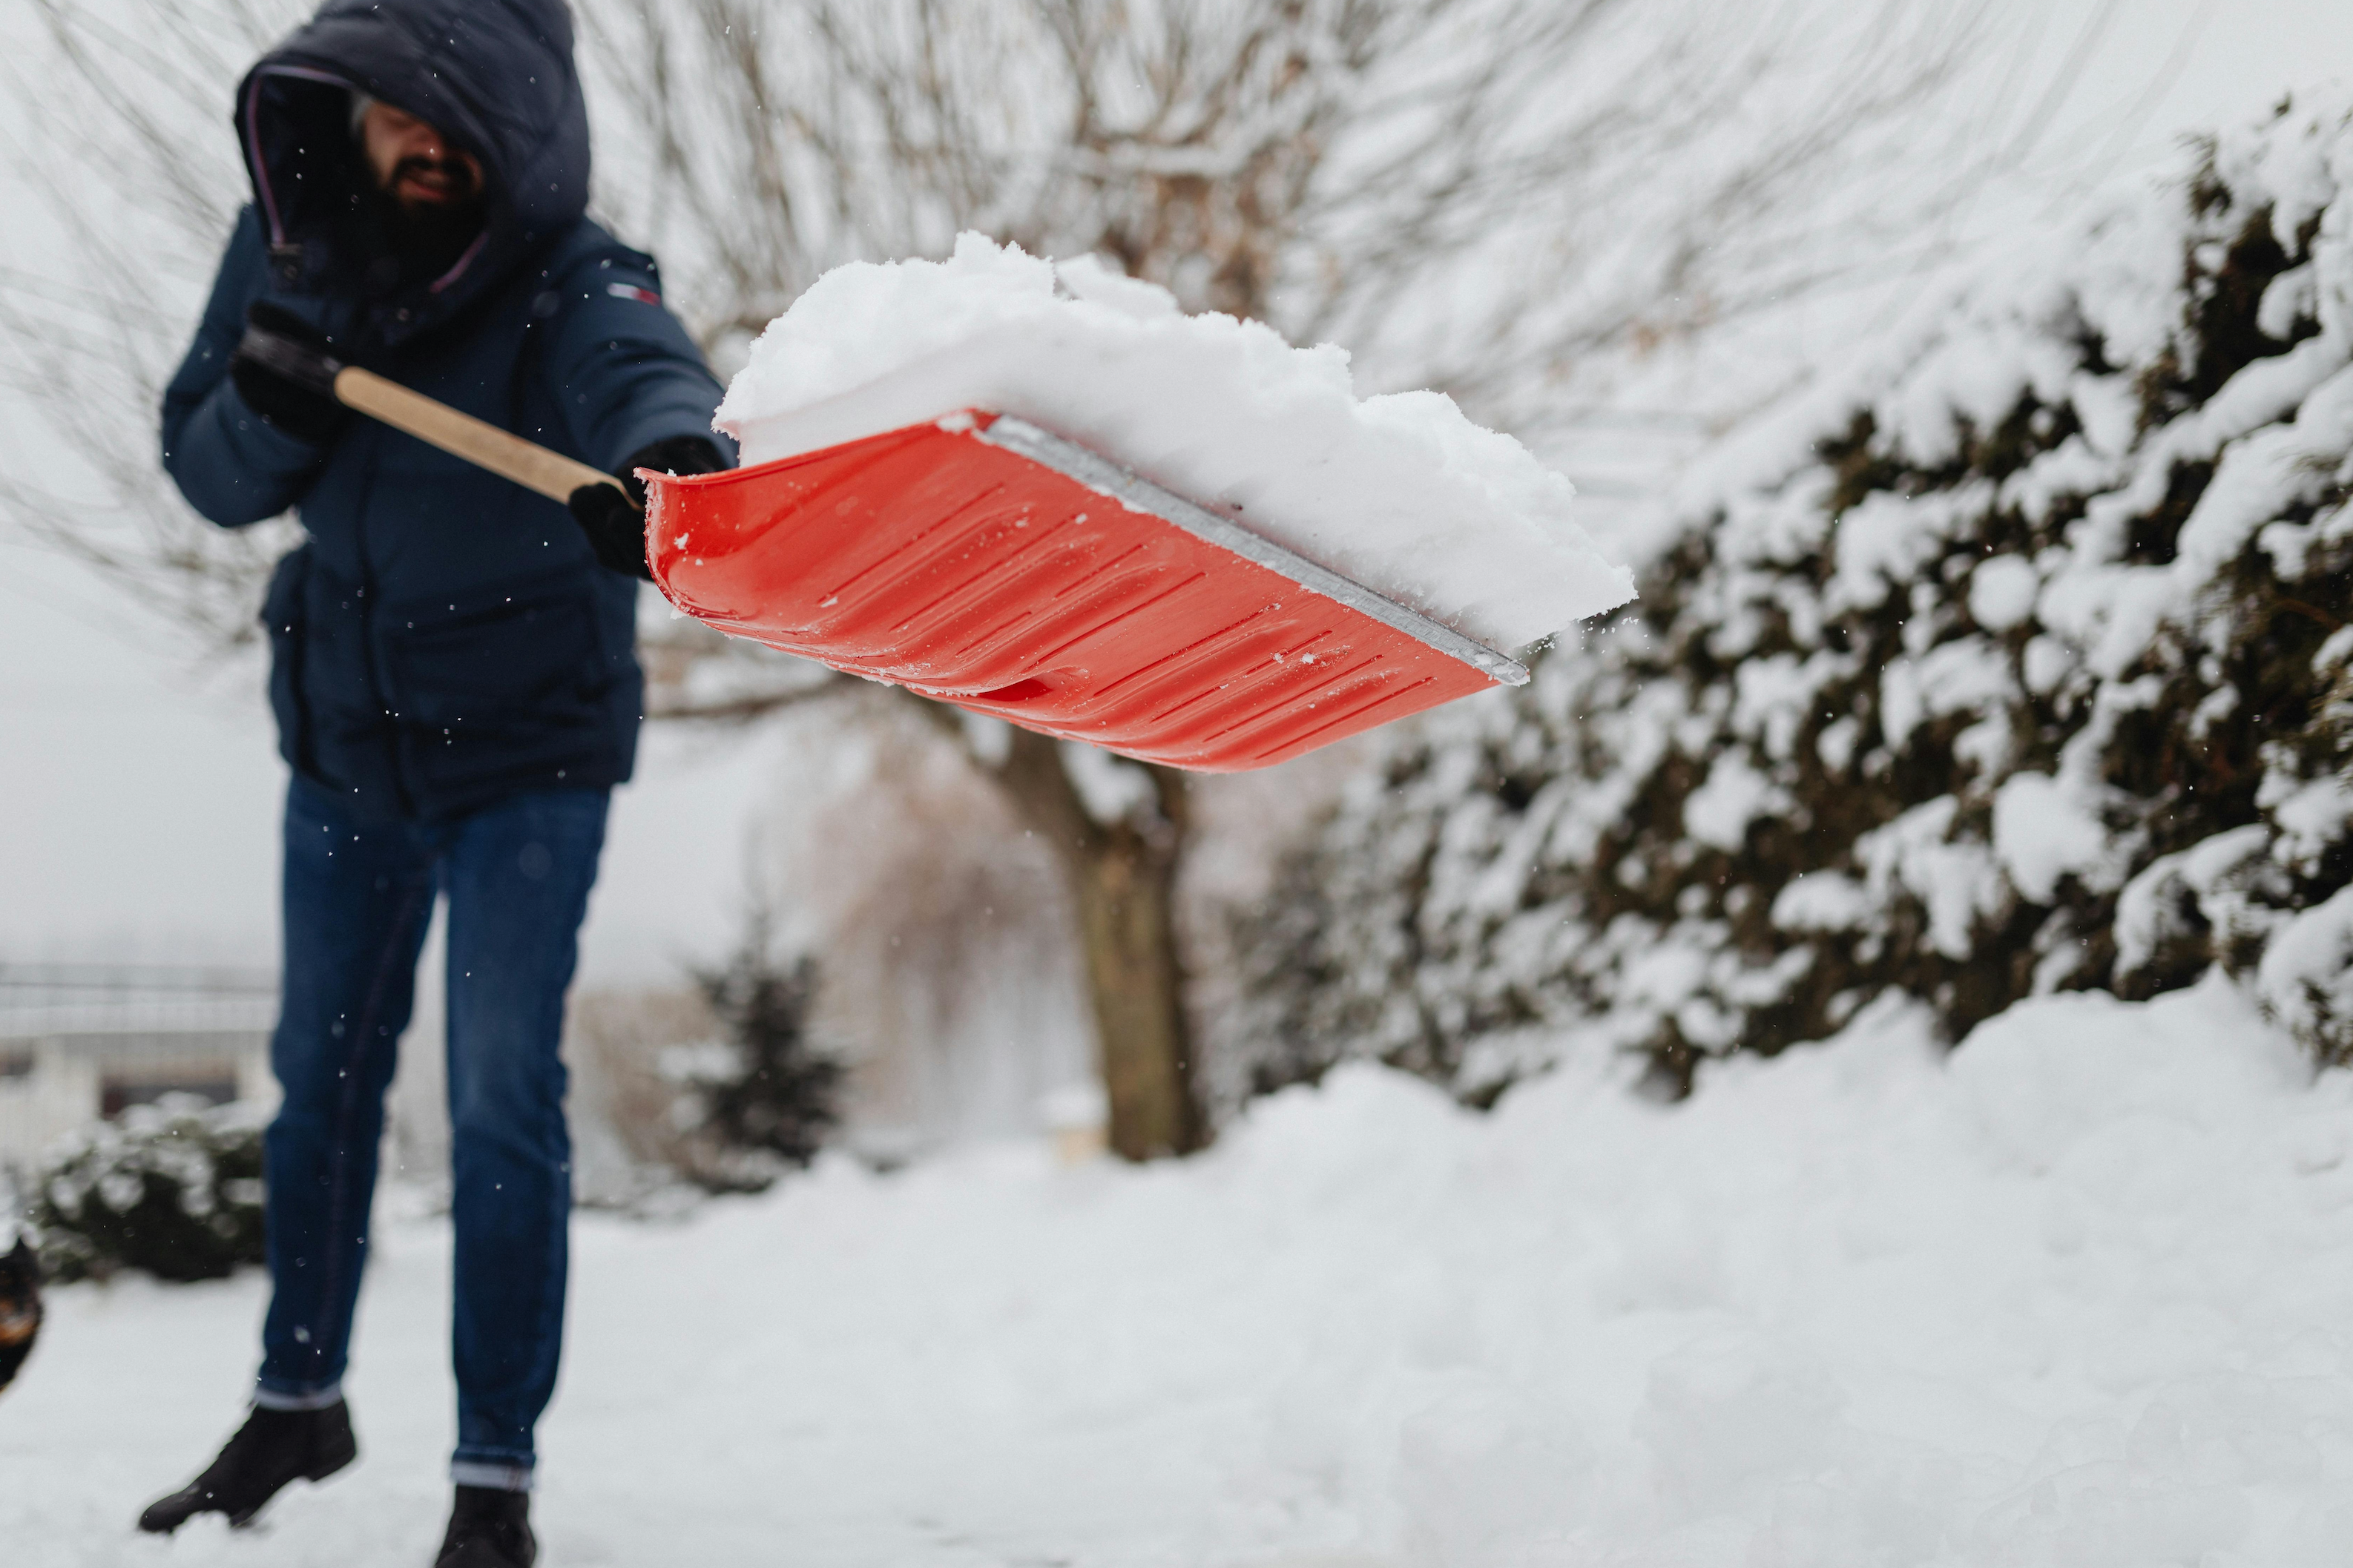 Snow Shovelling Safety: Protecting Your Heart During Winter Chores